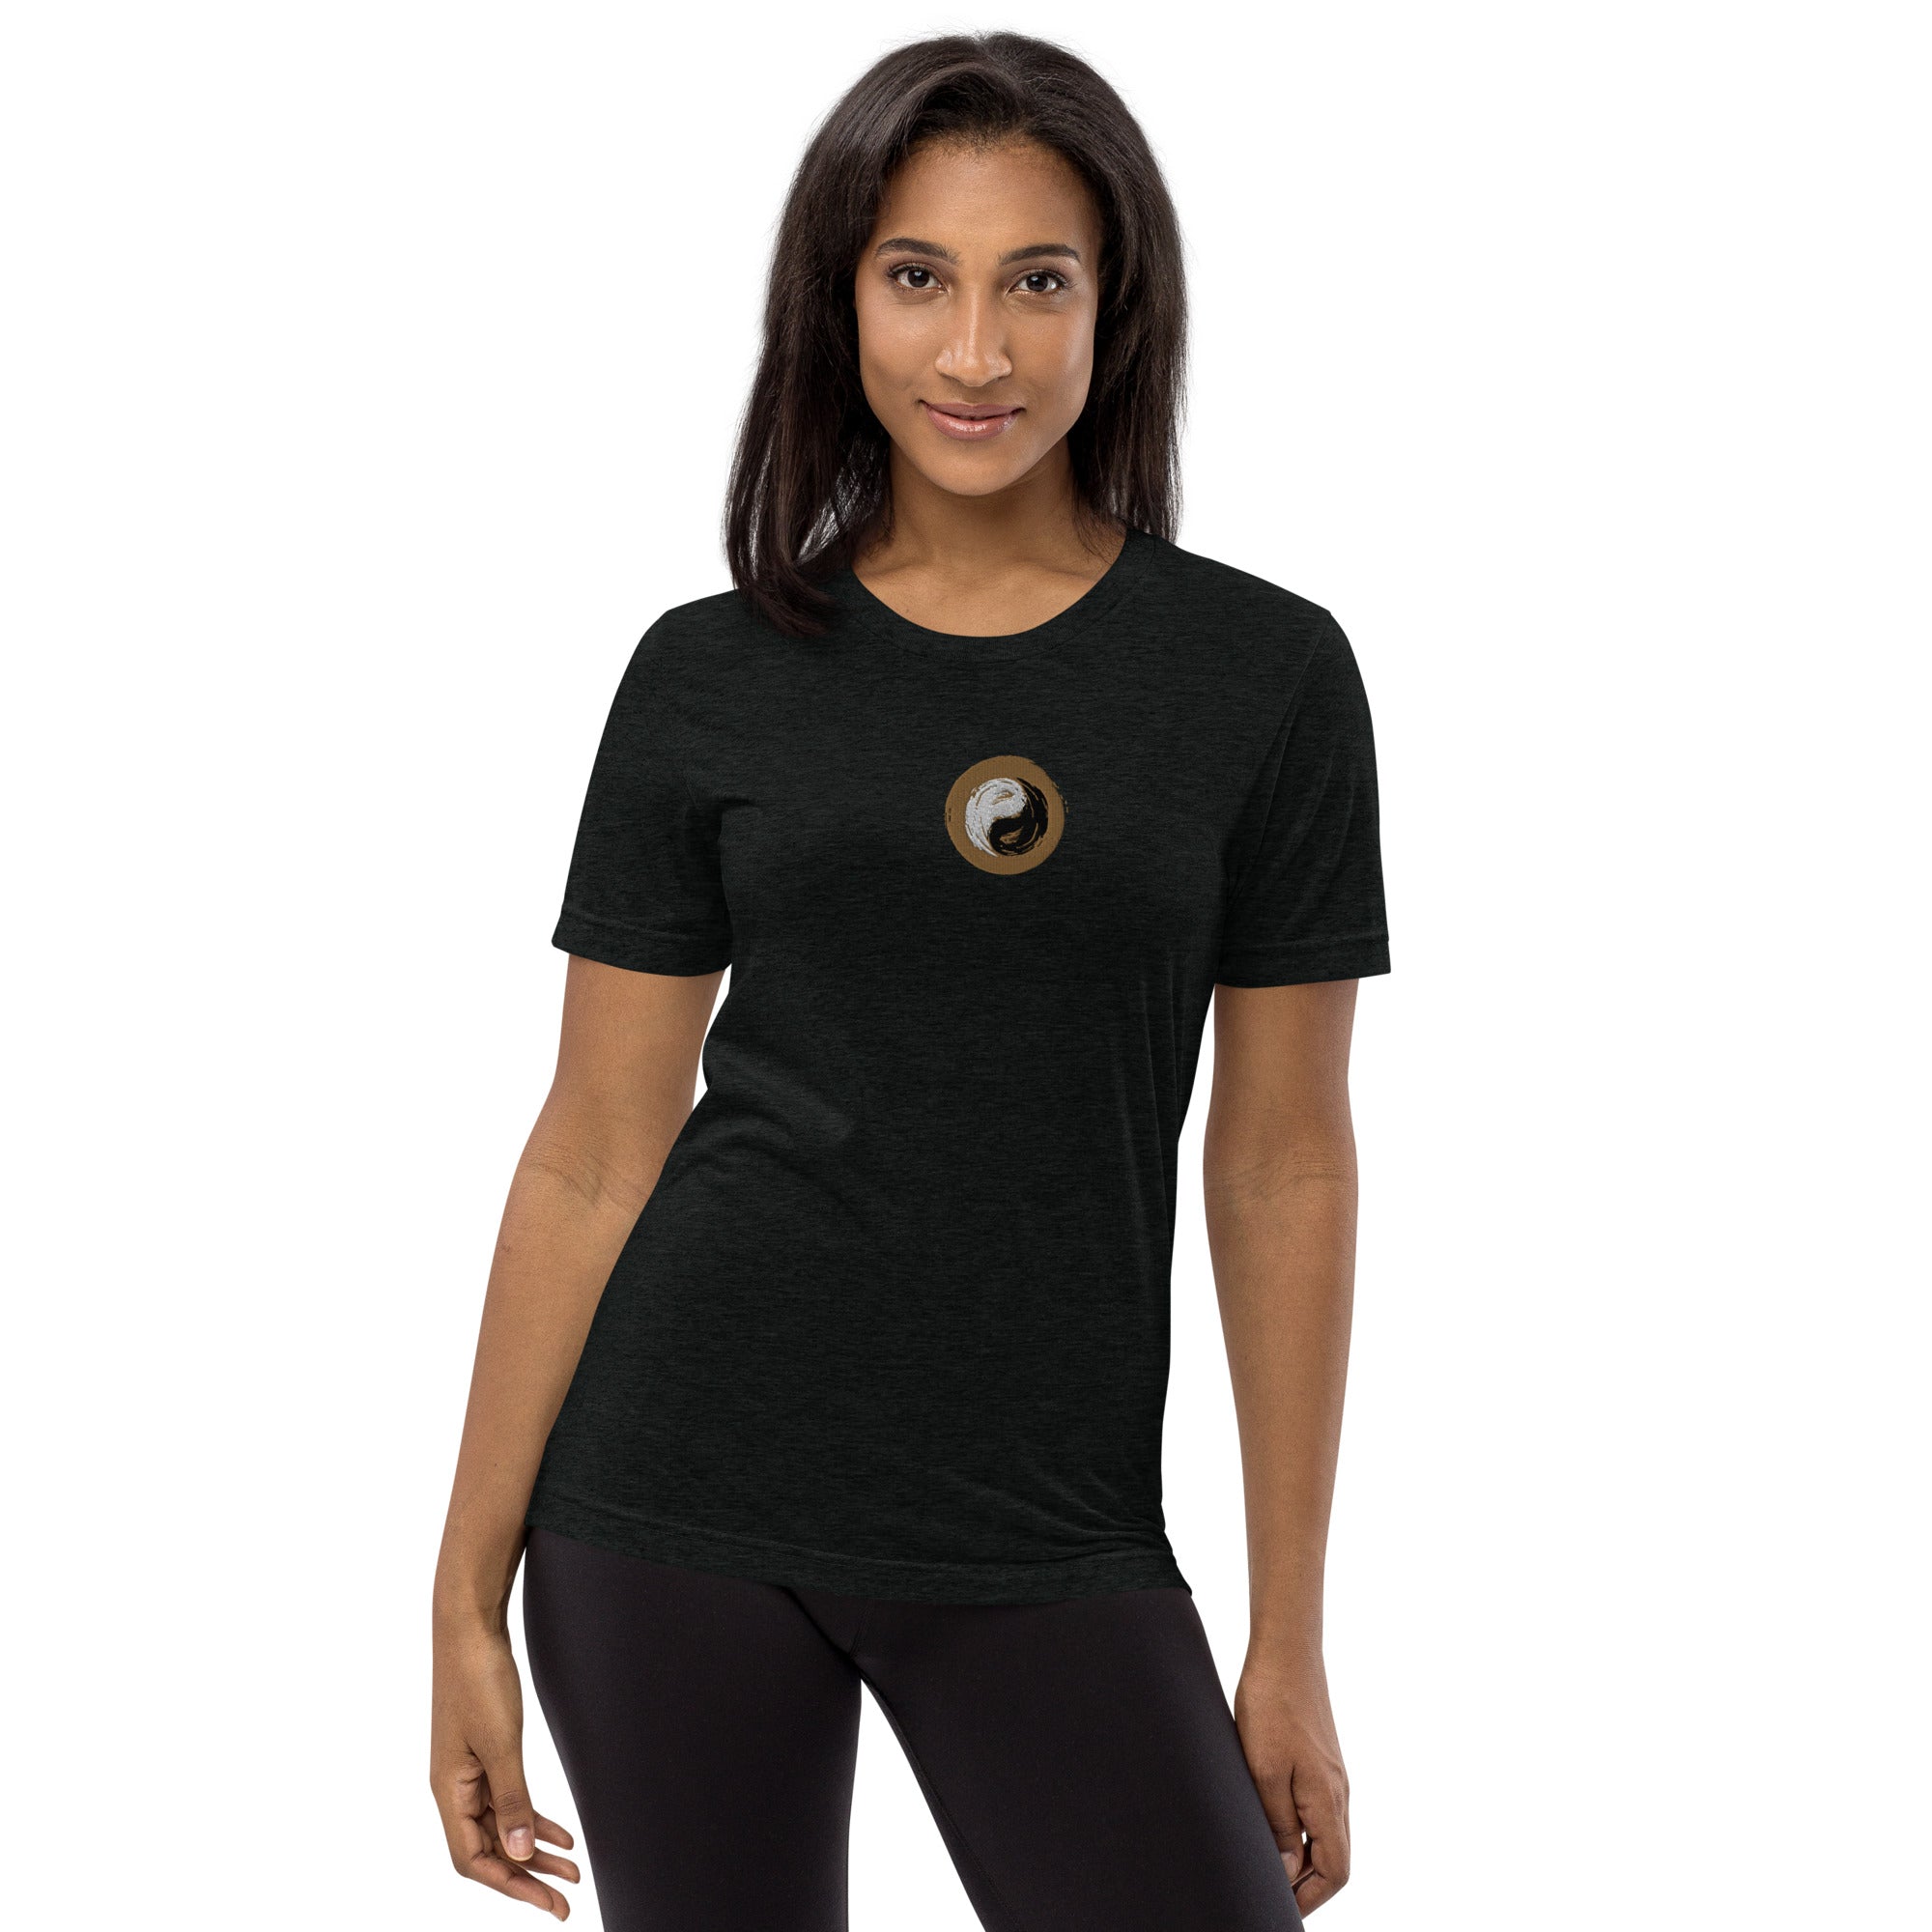 Personal Hour Style Yoga Short sleeve t-shirt - Personal Hour for Yoga and Meditations 